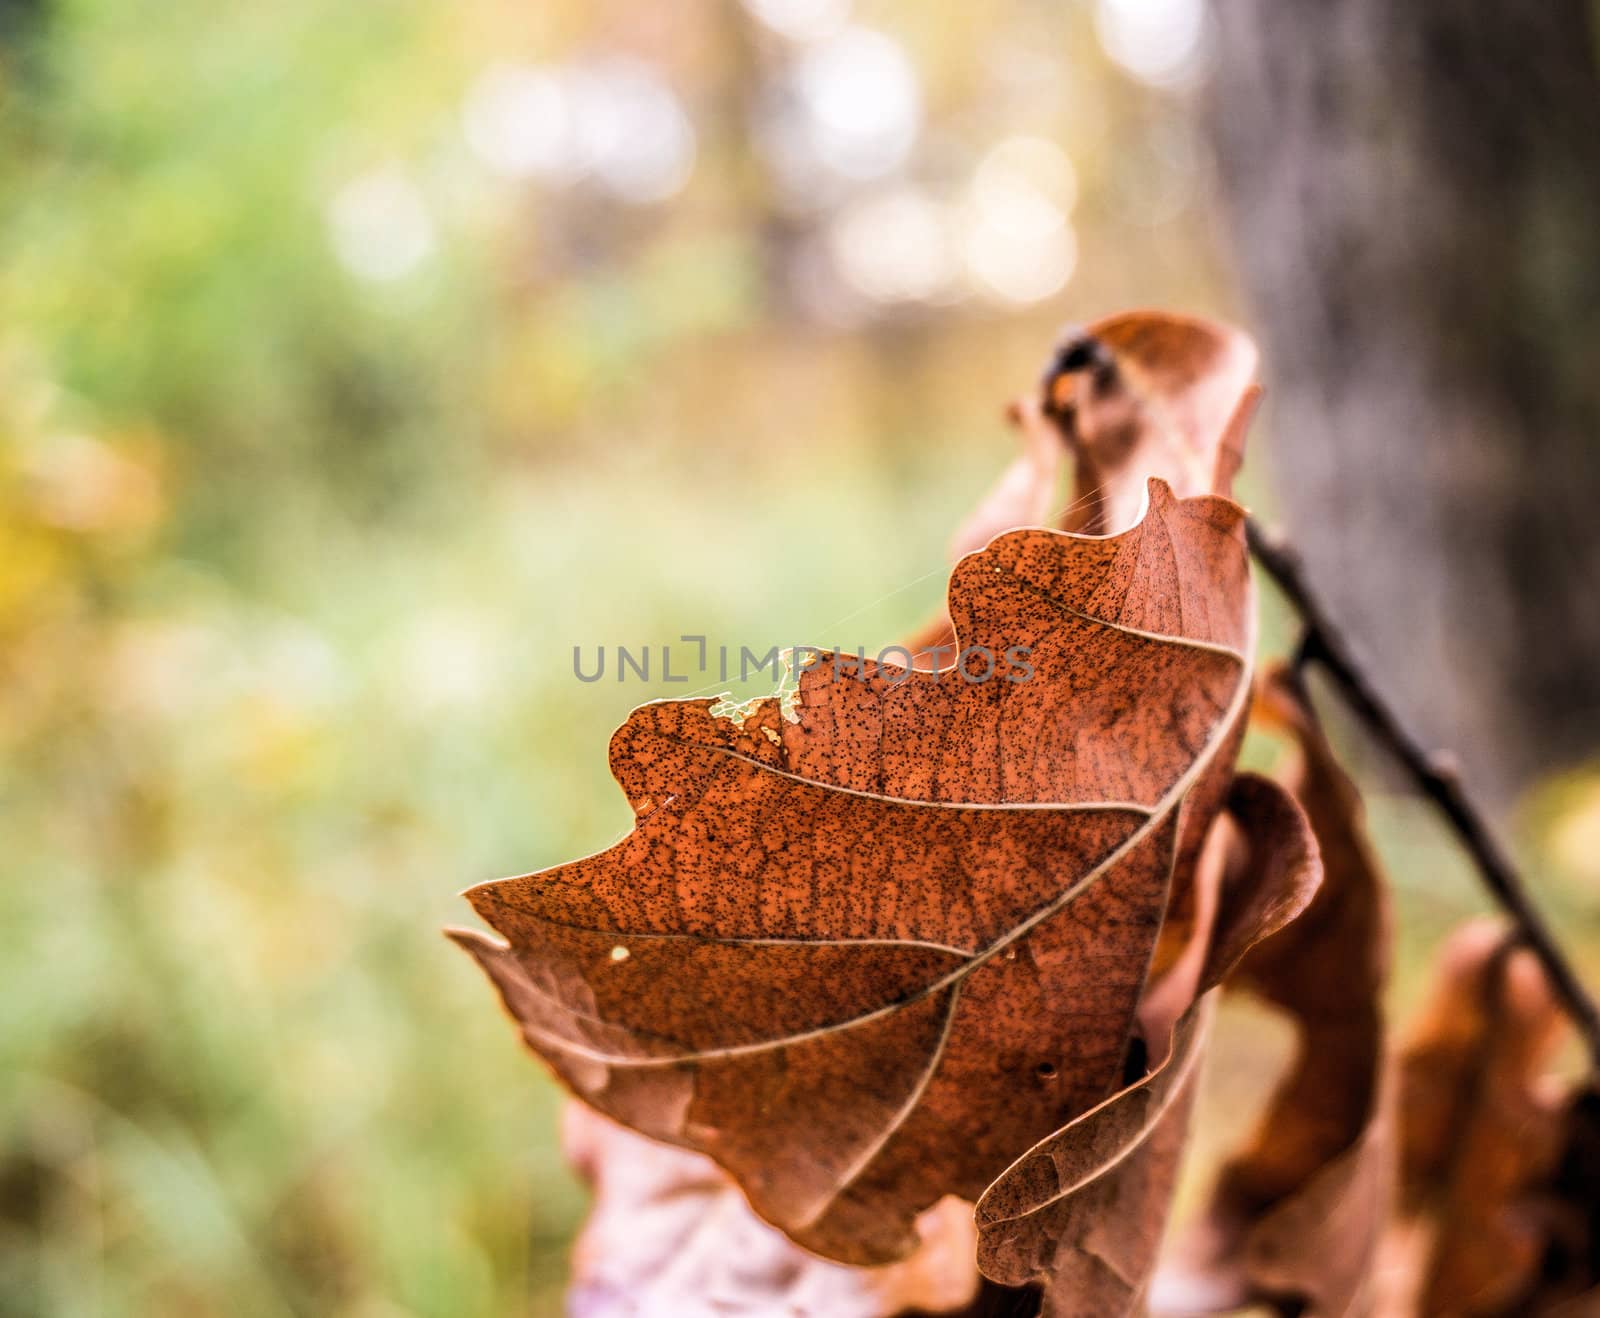 Brown leaf of an oak, withered, exempted from blurred background